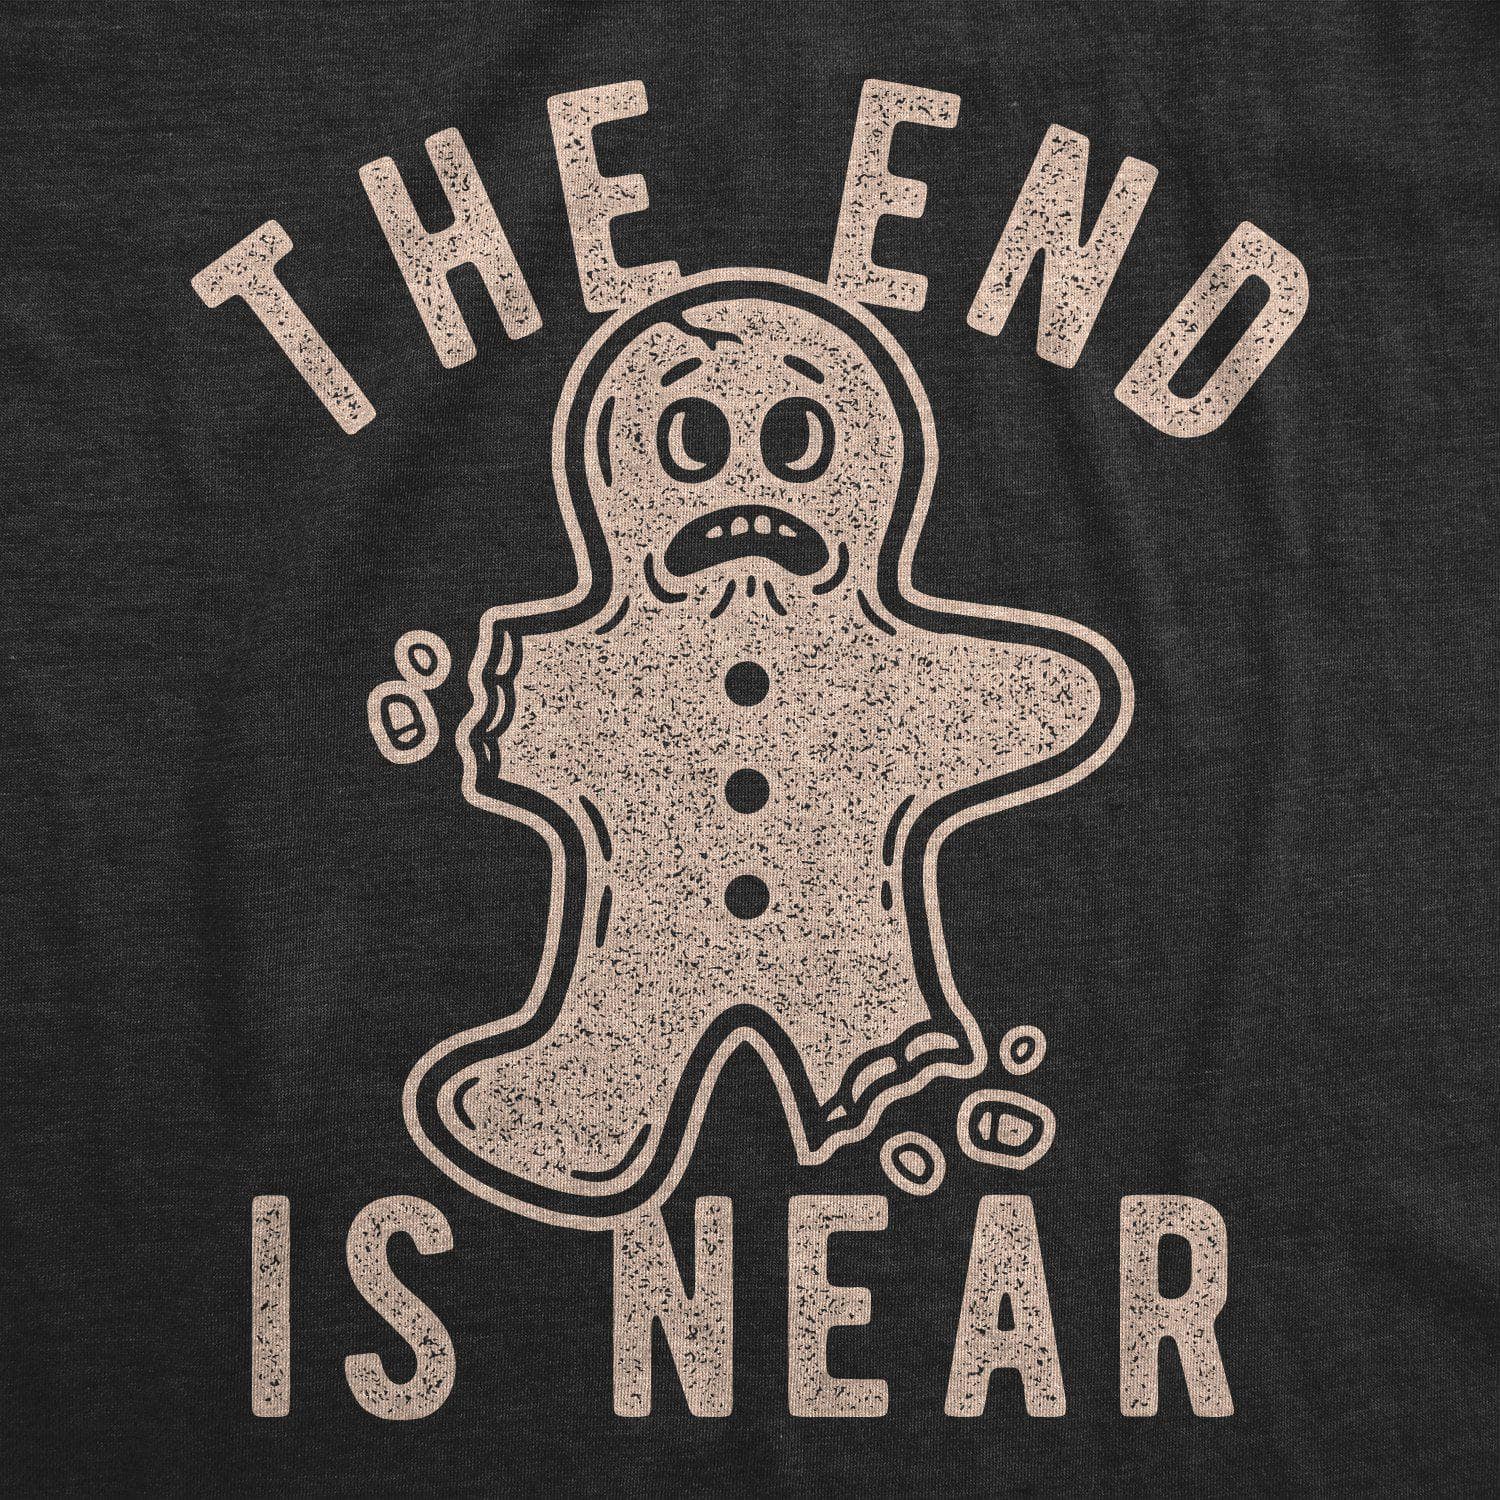 The End Is Near Gingerbread Women's Tshirt - Crazy Dog T-Shirts